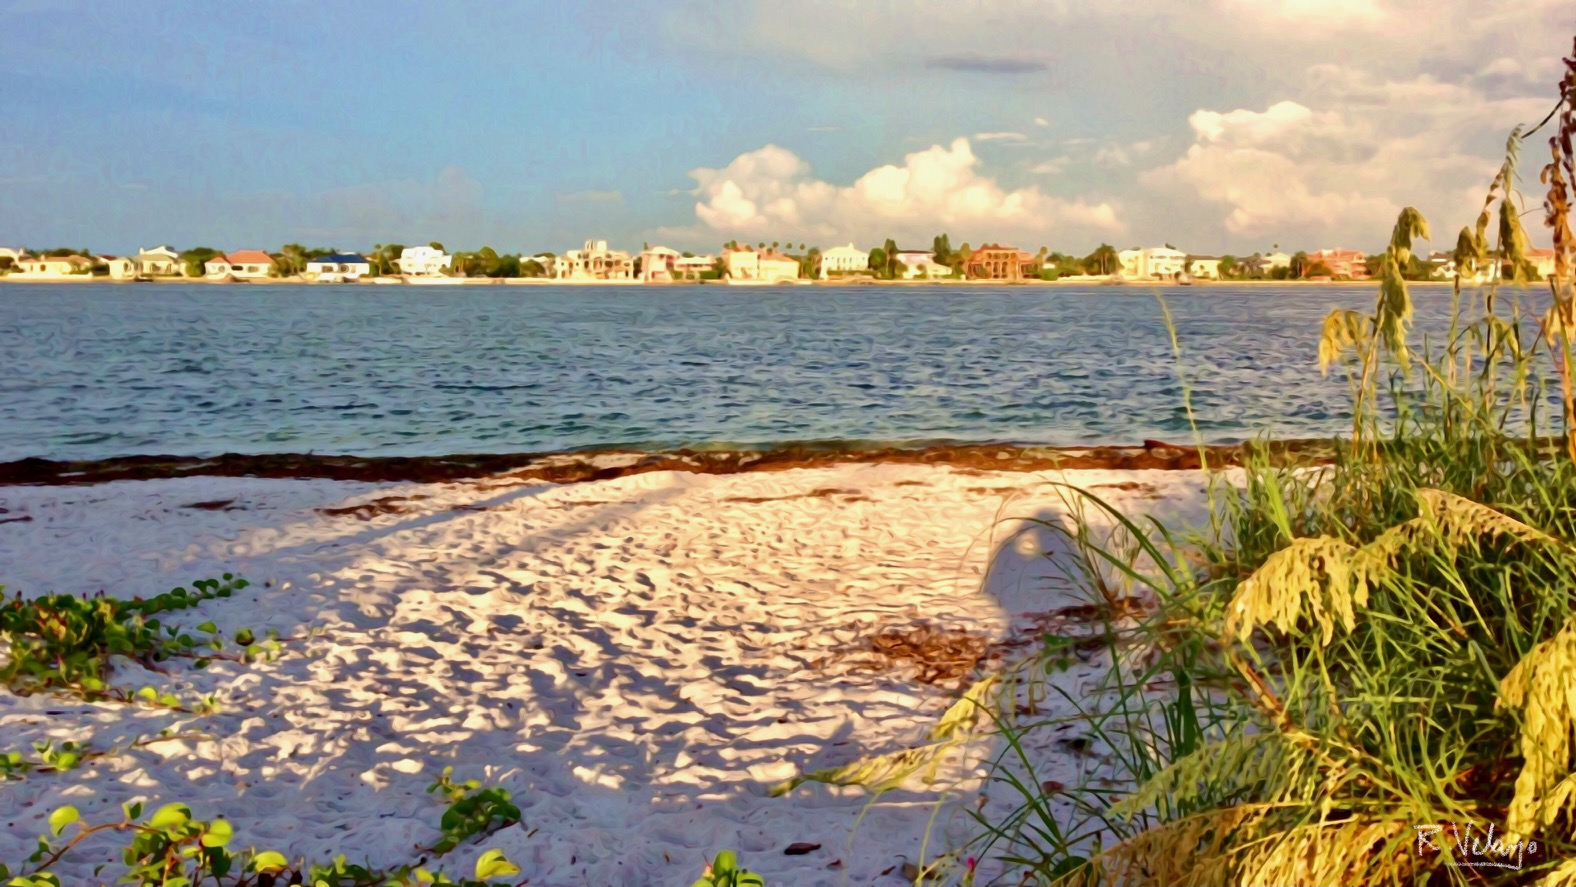 "VIEW OF PINE KEY FROM PASS-A-GRILLE DOG PARK" [Created: 12/02/2021]